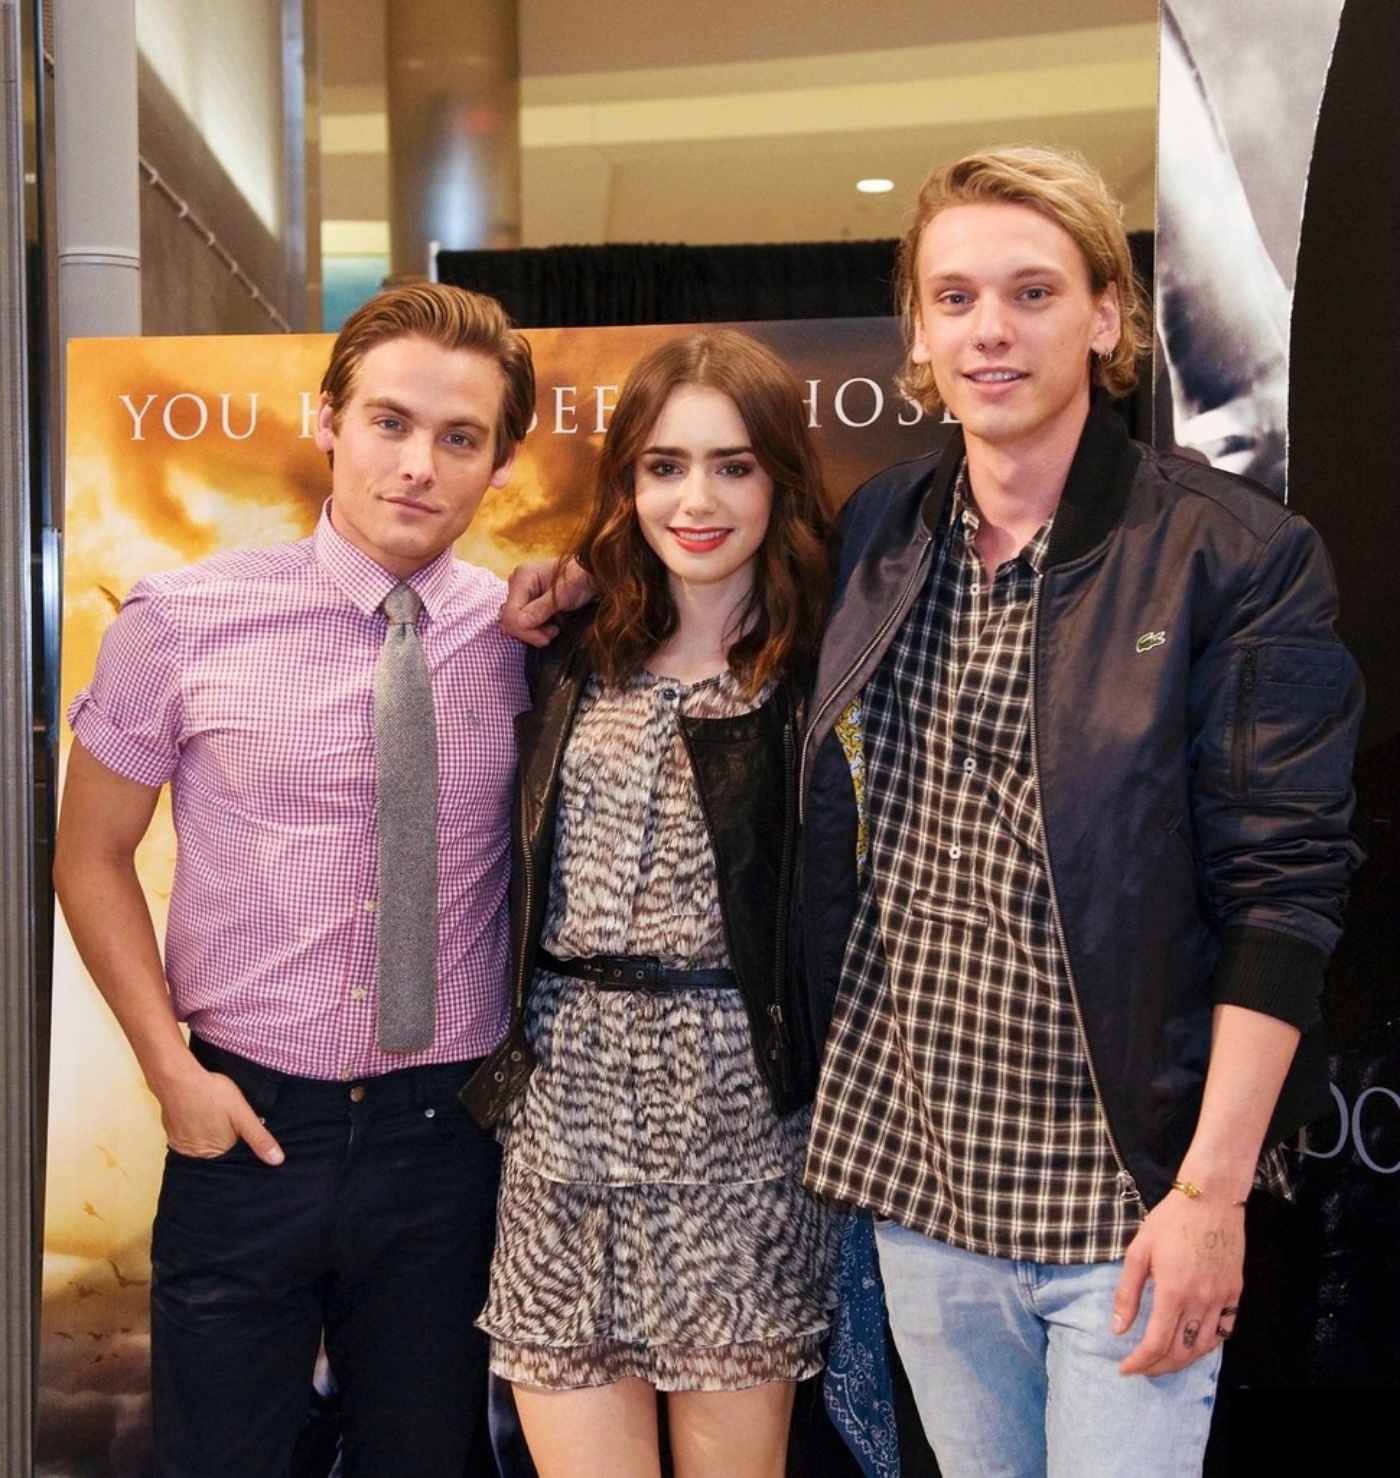 Lily Collins on City of Bones Mall Tour submitted by Canary + Rook